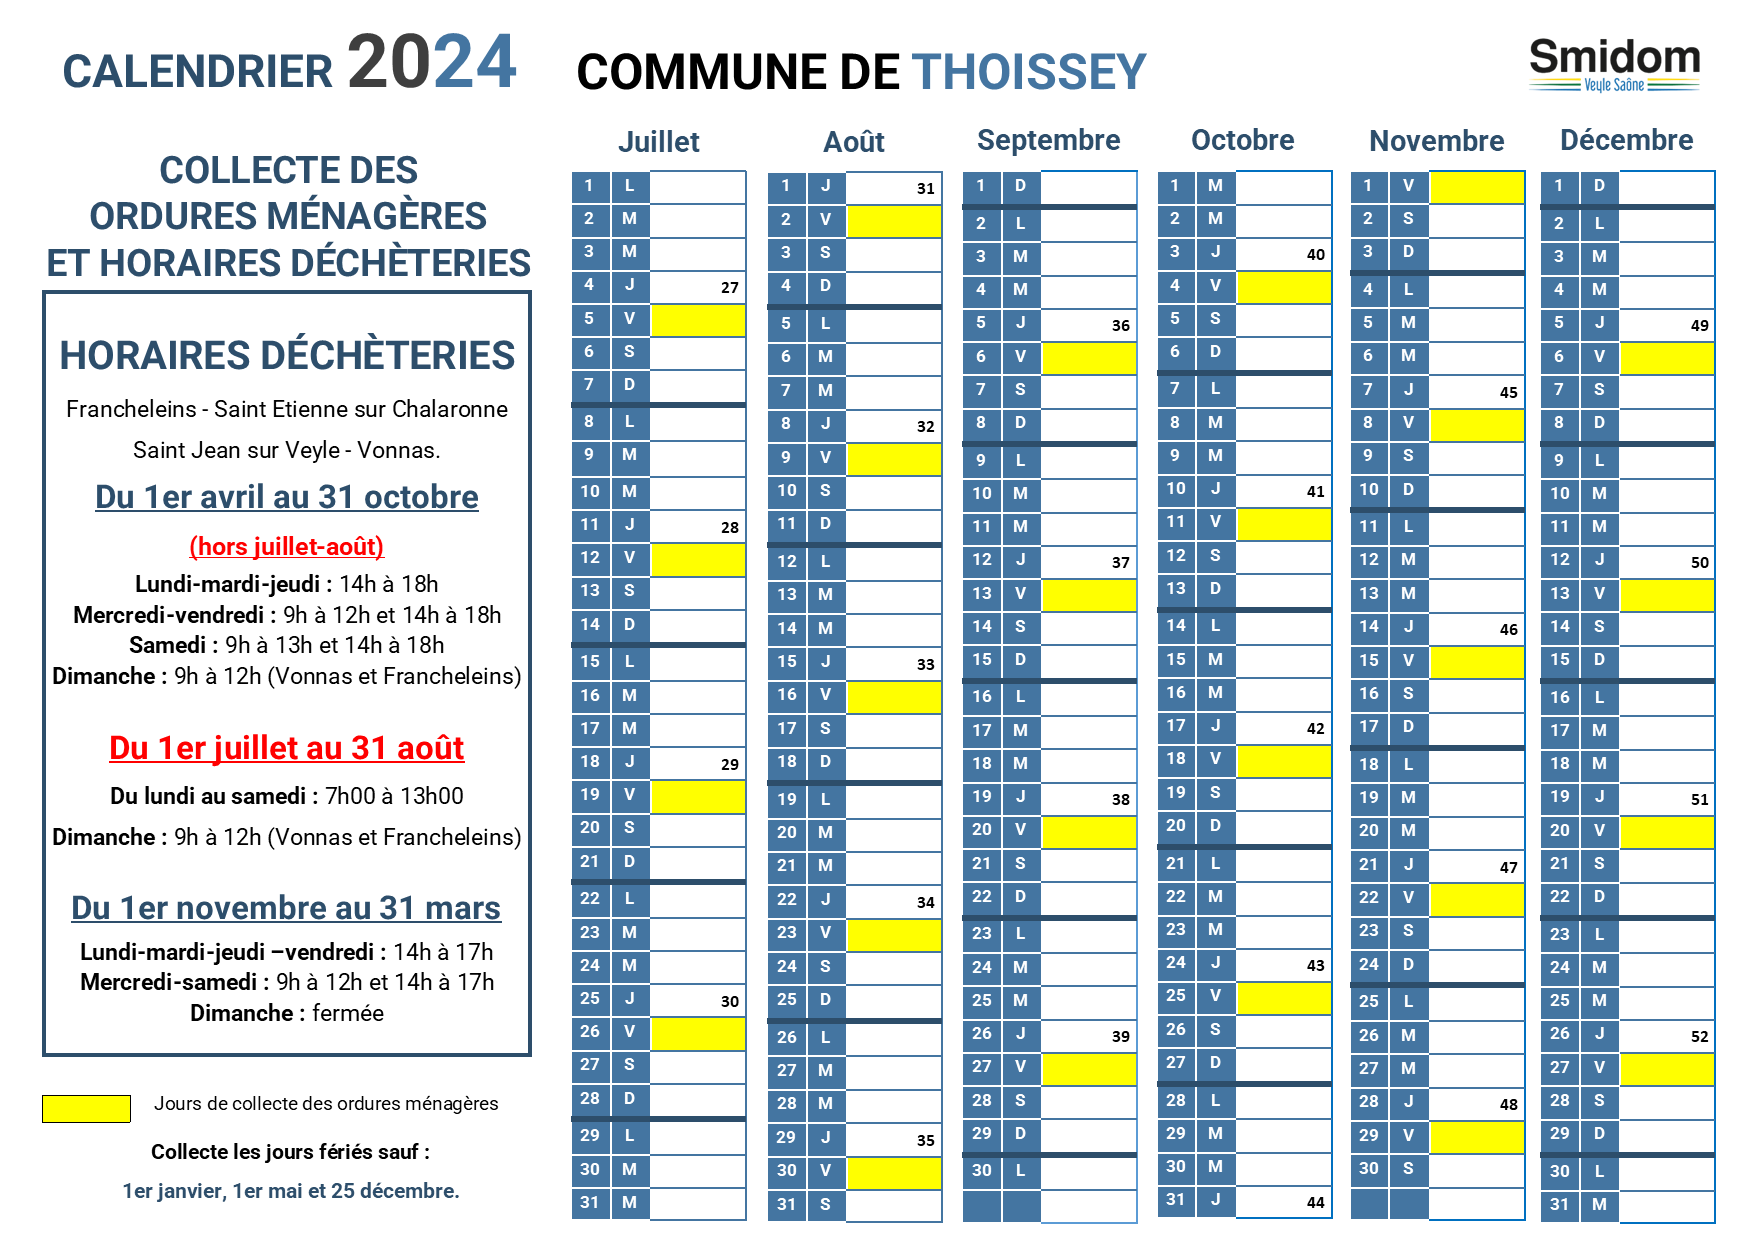 THOISSEY - Calendrier 2024 - 2.png